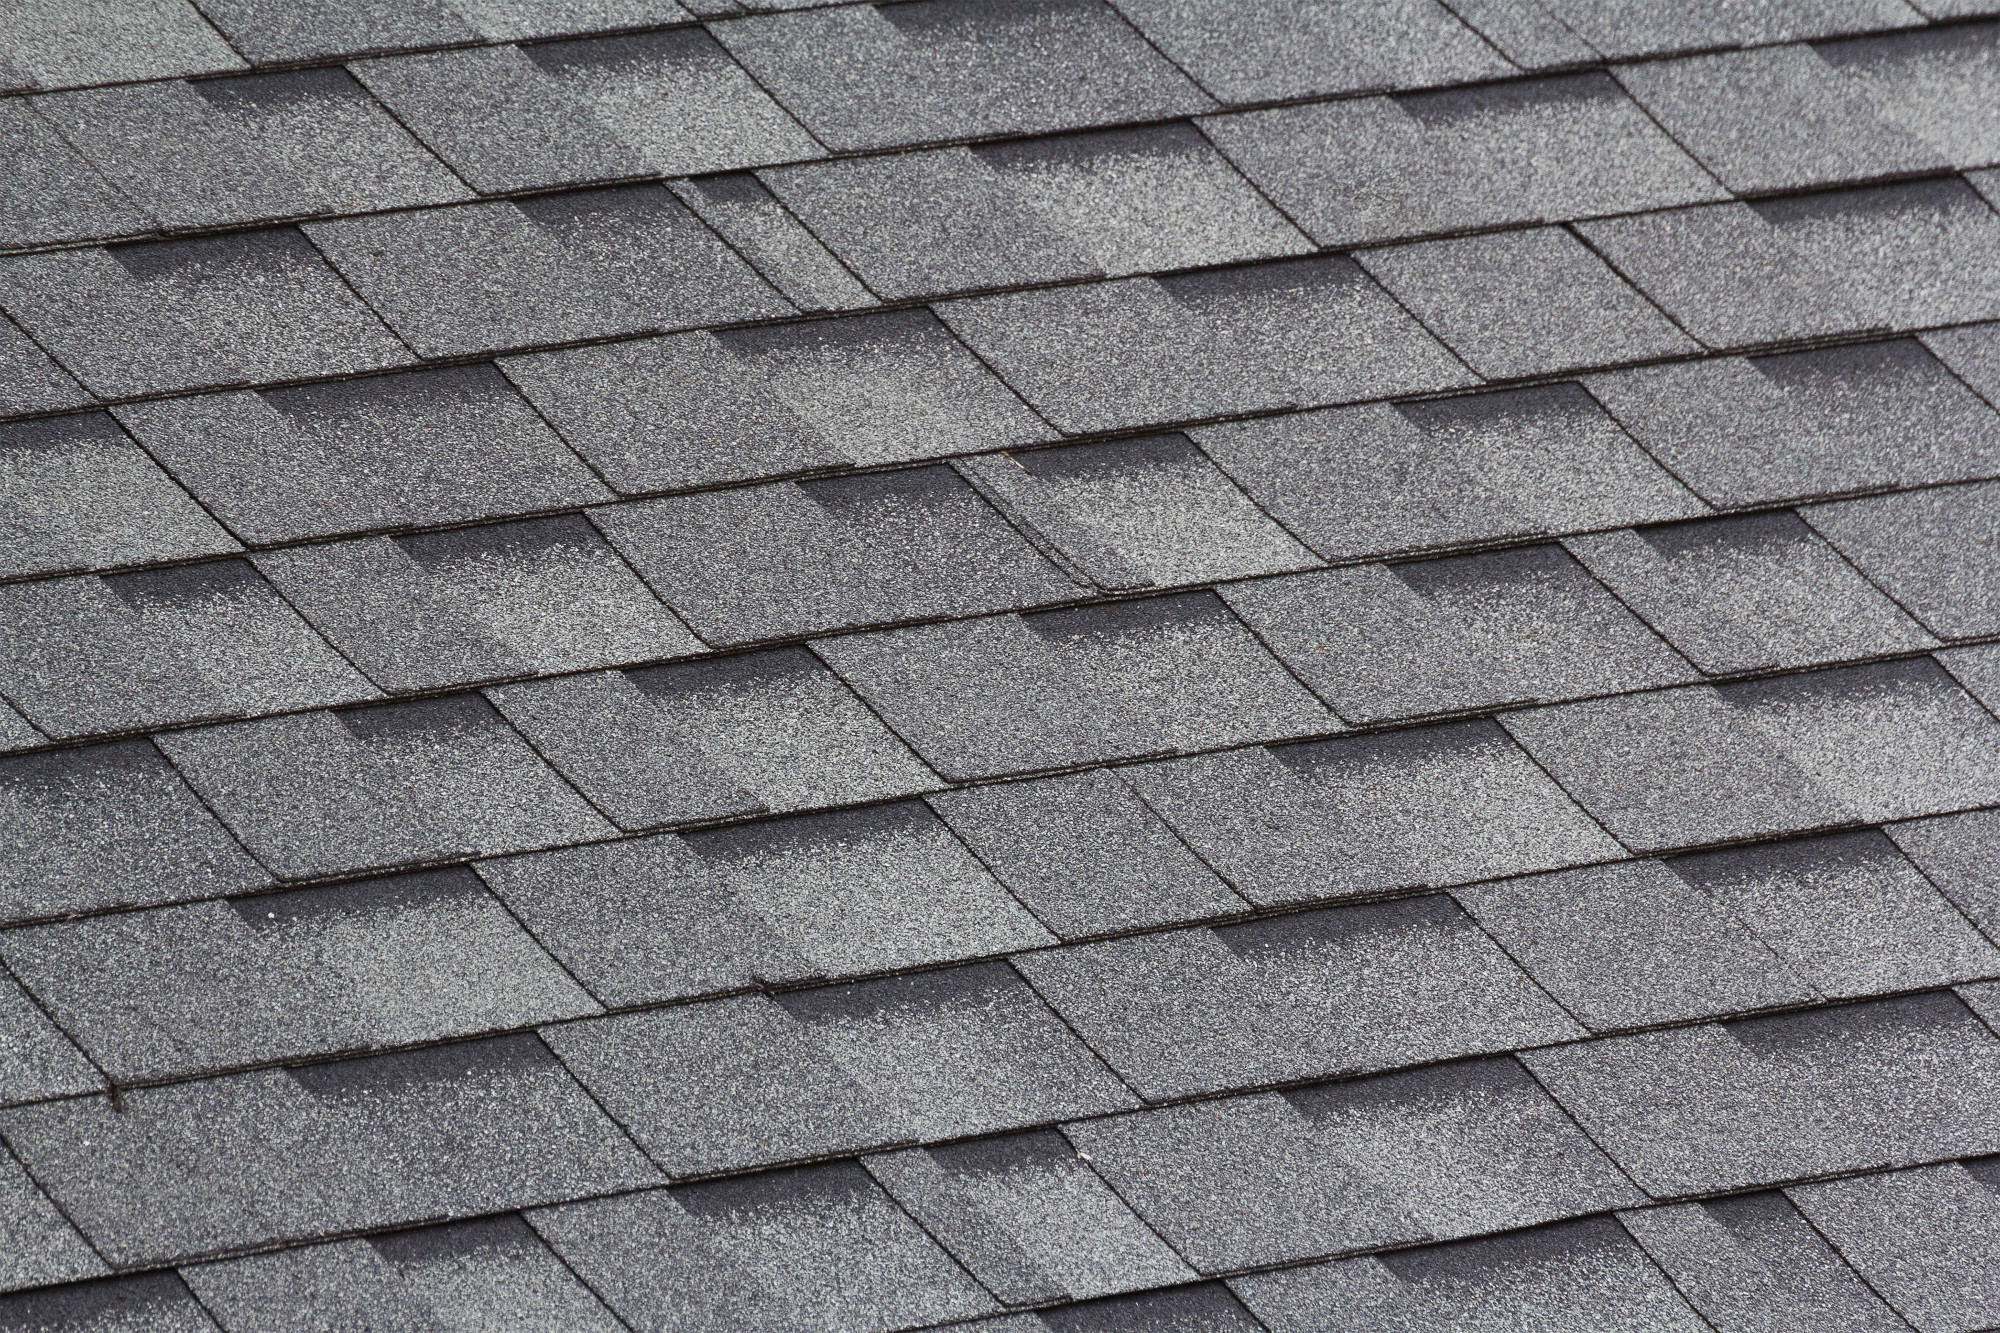 Shingle roofs are one of the most popular roofing materials out there, but they aren't indestructible. Learn about the most common repair needs here.